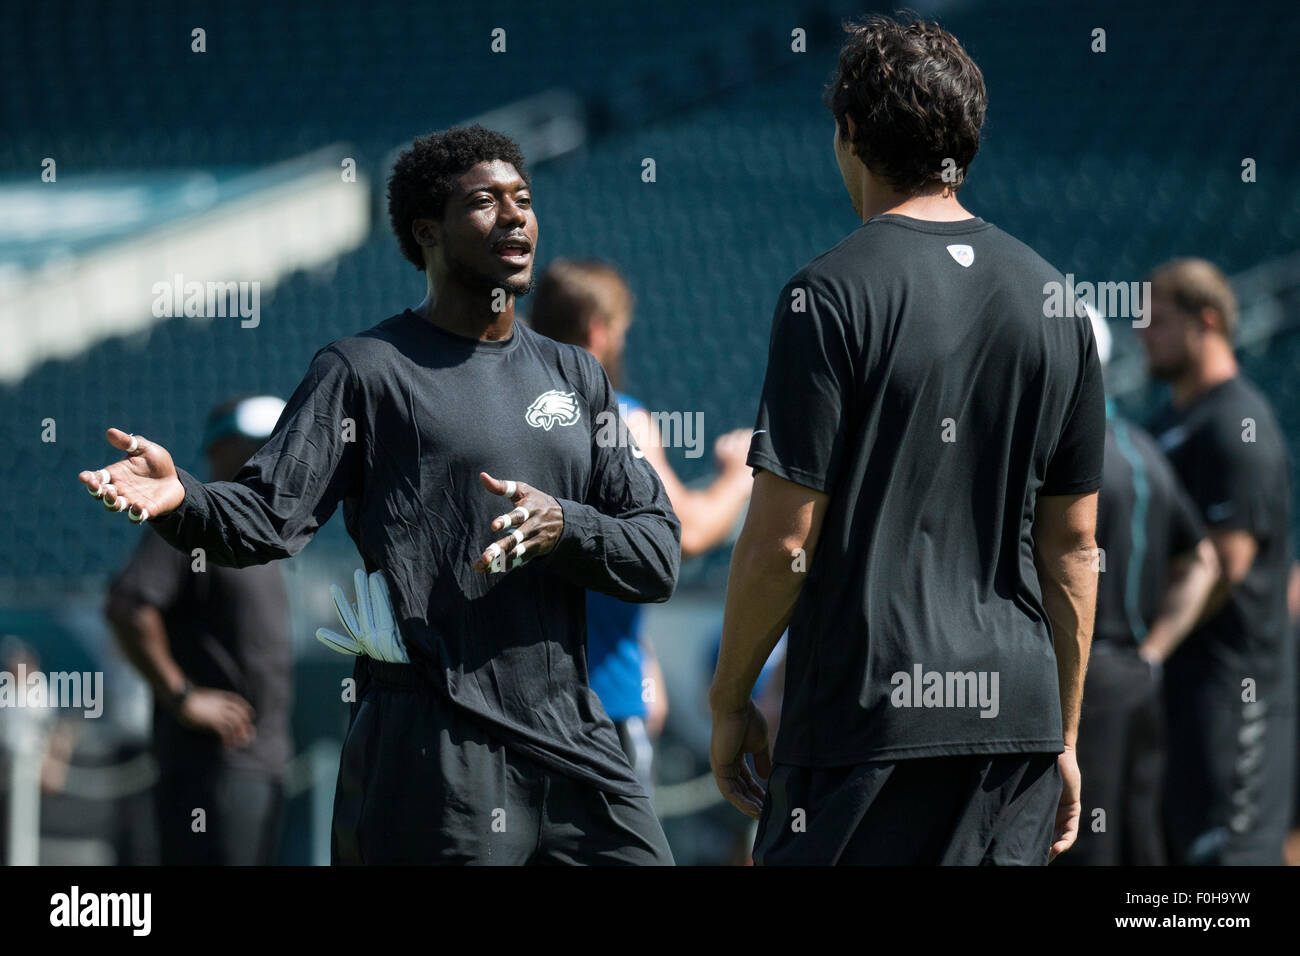 Philadelphia, Pennsylvania, USA. 16th Aug, 2015. Philadelphia Eagles defensive back Byron Maxwell (31) talks with quarterback Sam Bradford (7) during warm-ups prior to the NFL game between the Indianapolis Colts and the Philadelphia Eagles at Lincoln Financial Field in Philadelphia, Pennsylvania. Christopher Szagola/CSM/Alamy Live News Stock Photo